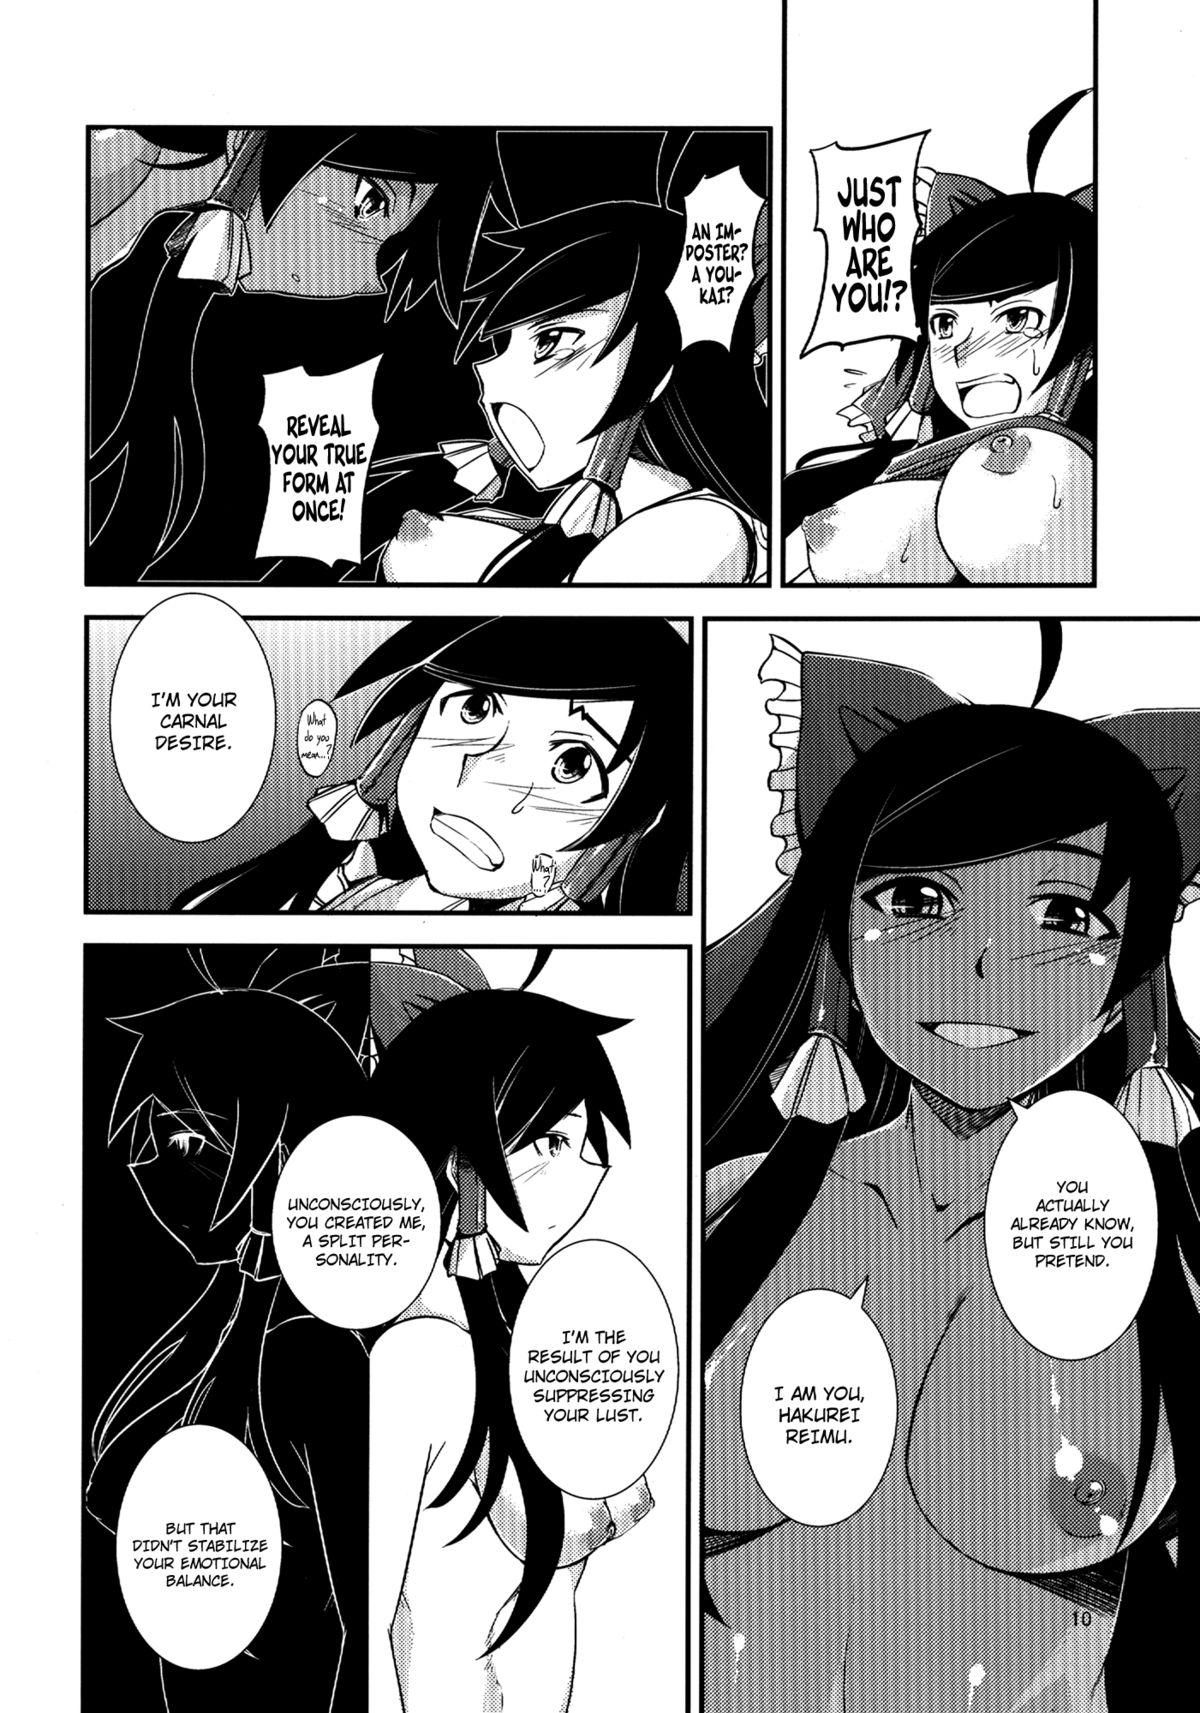 Love The Incident of the Black Shrine Maiden - Touhou project Boss - Page 10